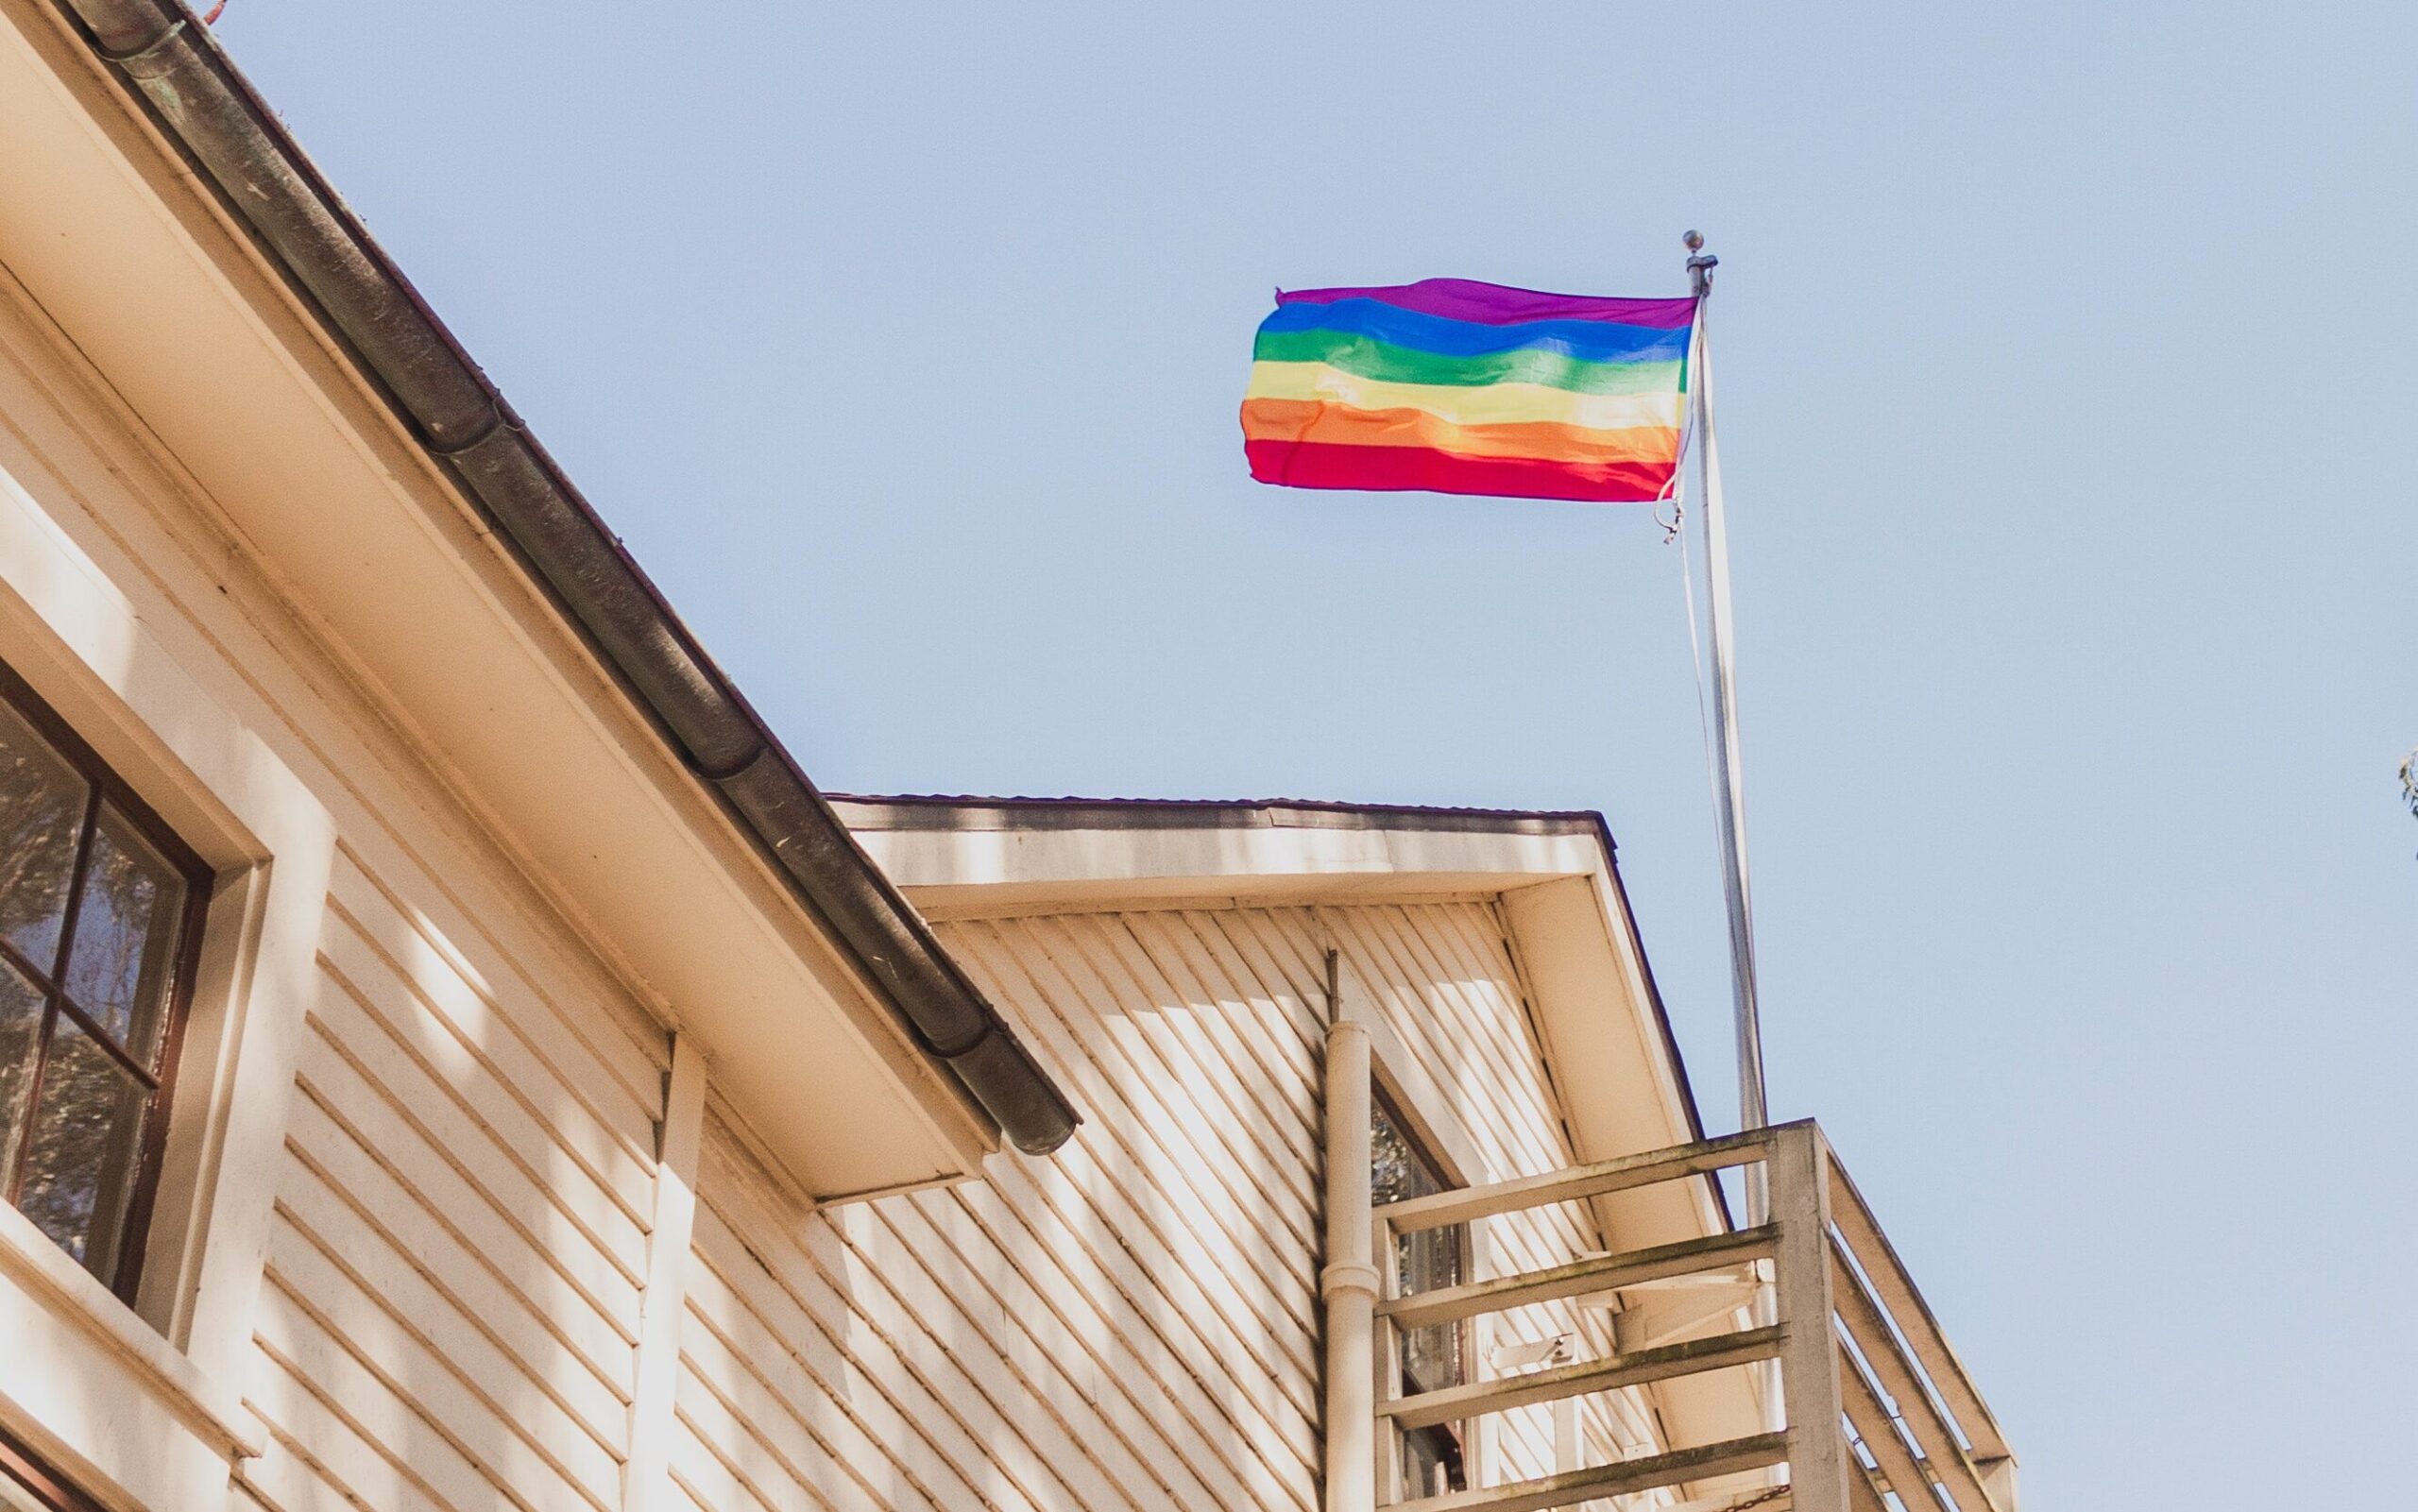 Decorative. A pride flag flies at the top of a house.